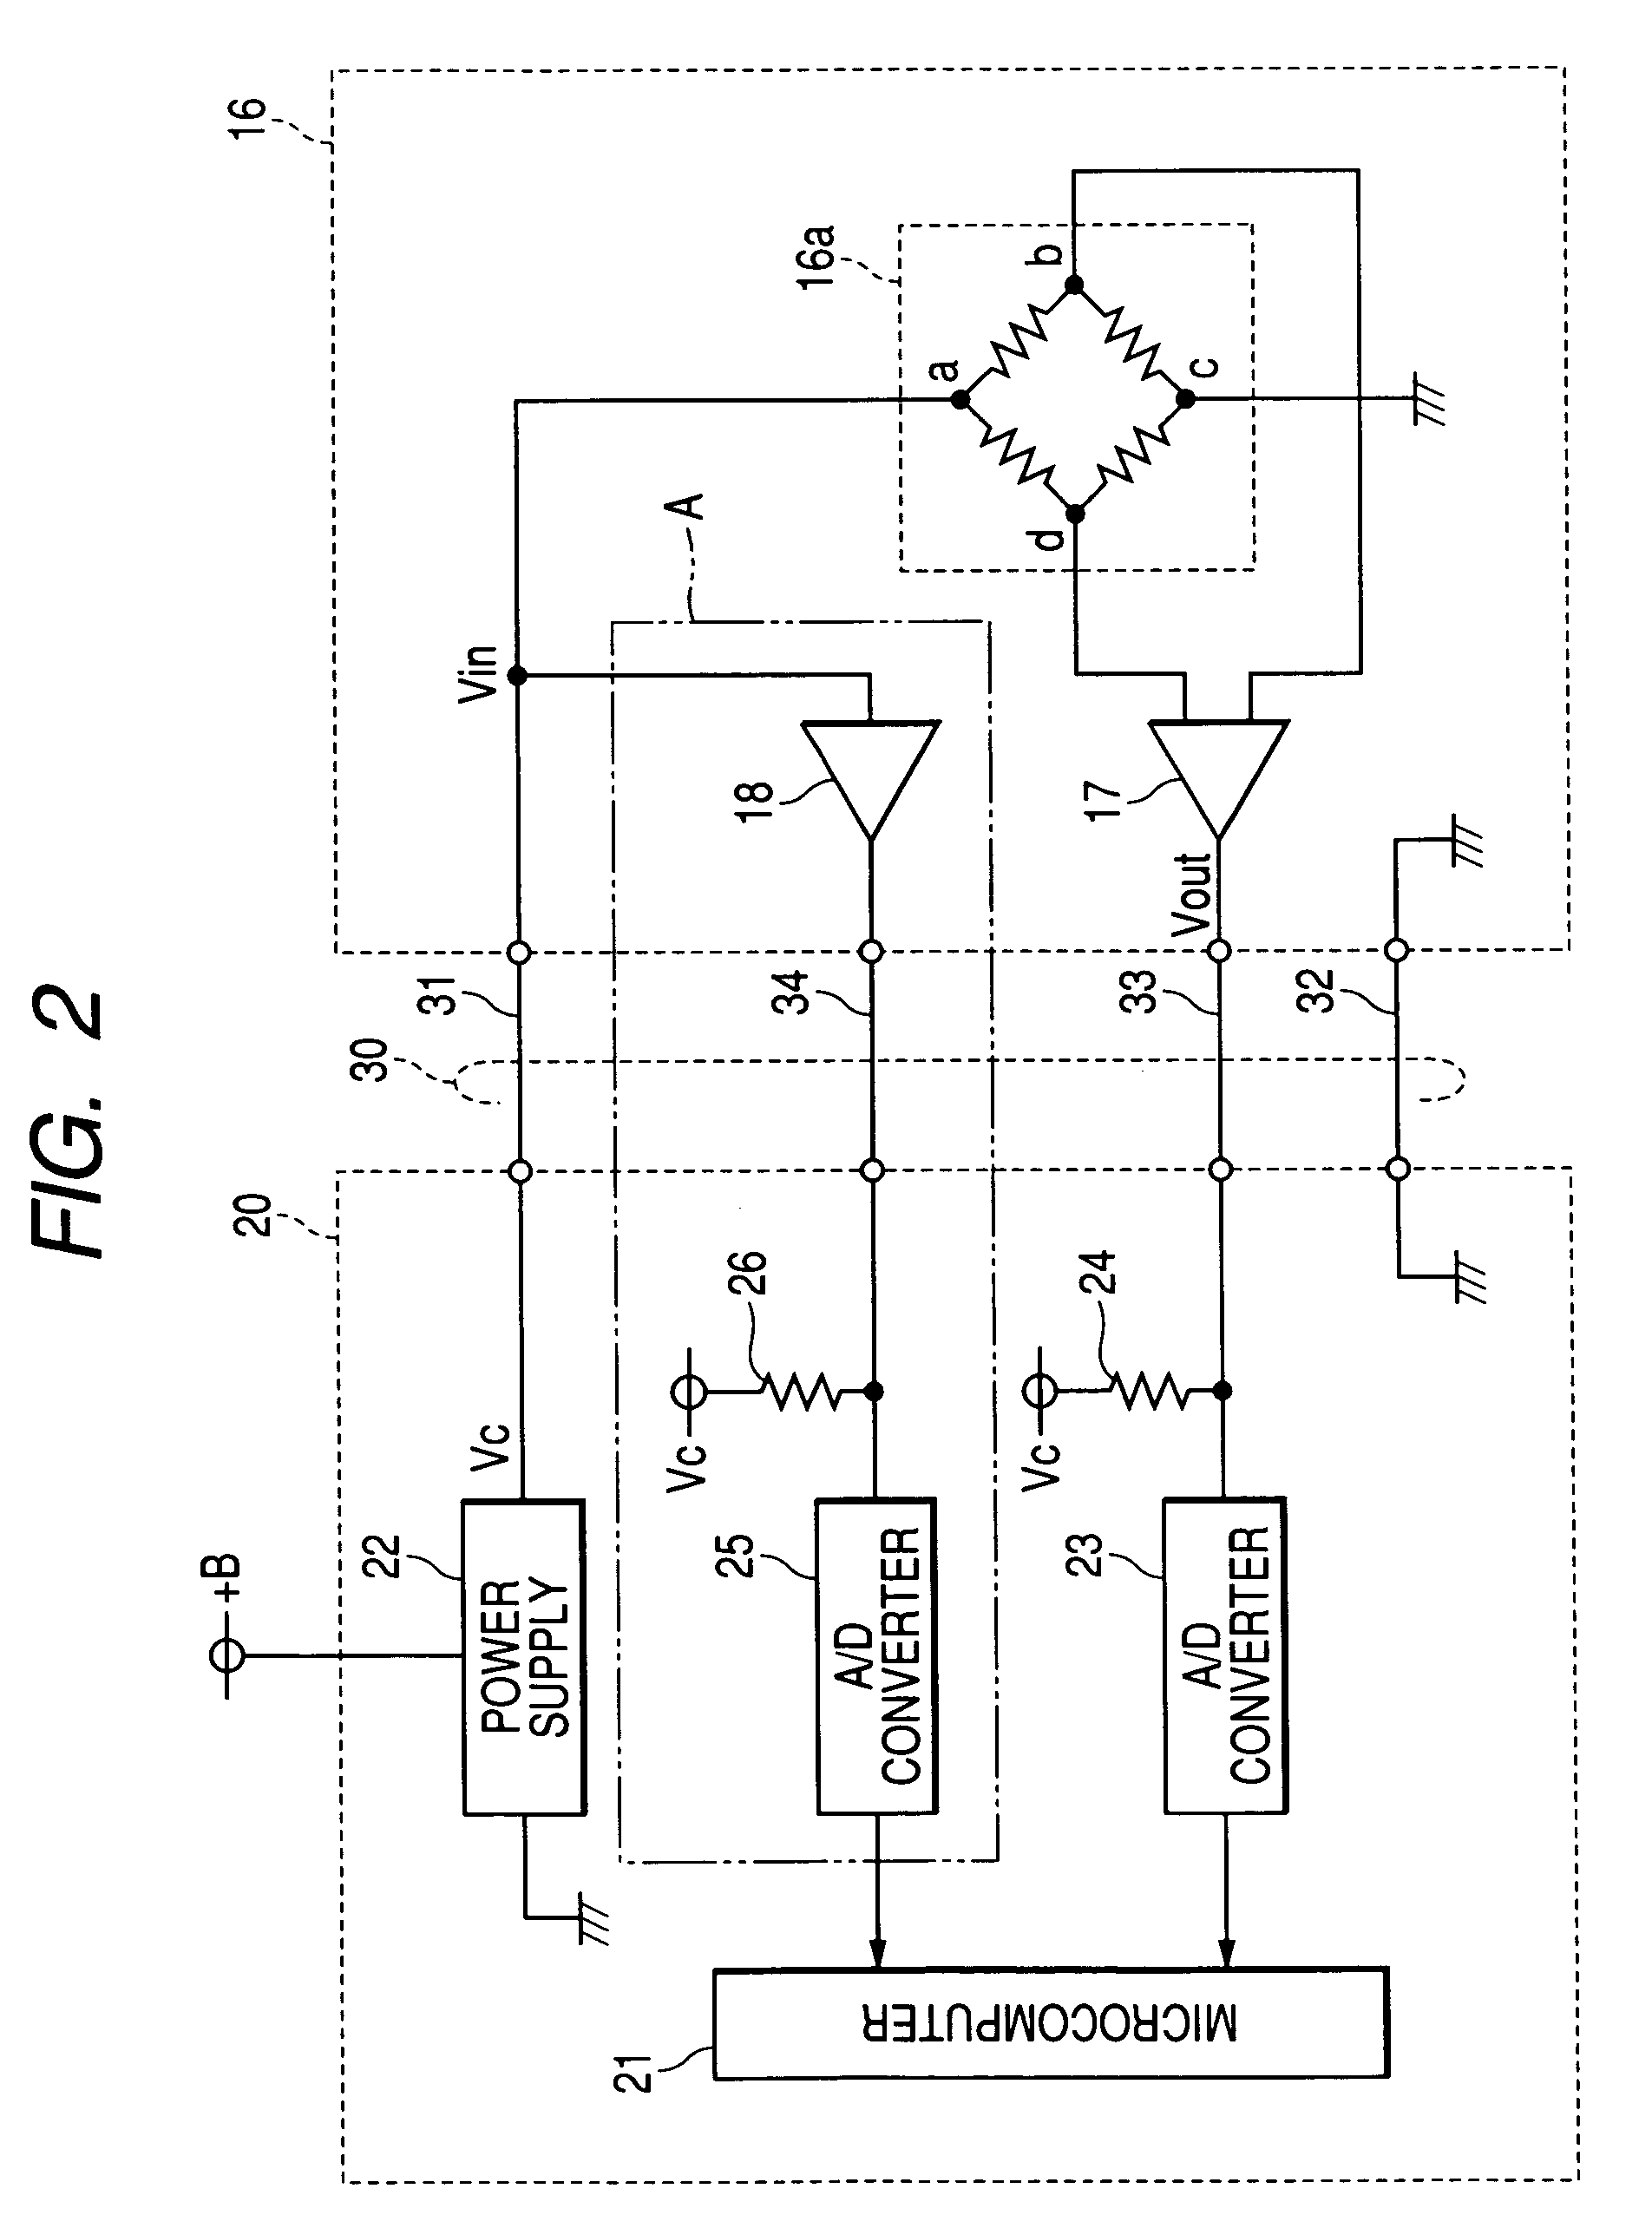 Common rail fuel injection system designed to avoid error in determining common rail fuel pressure